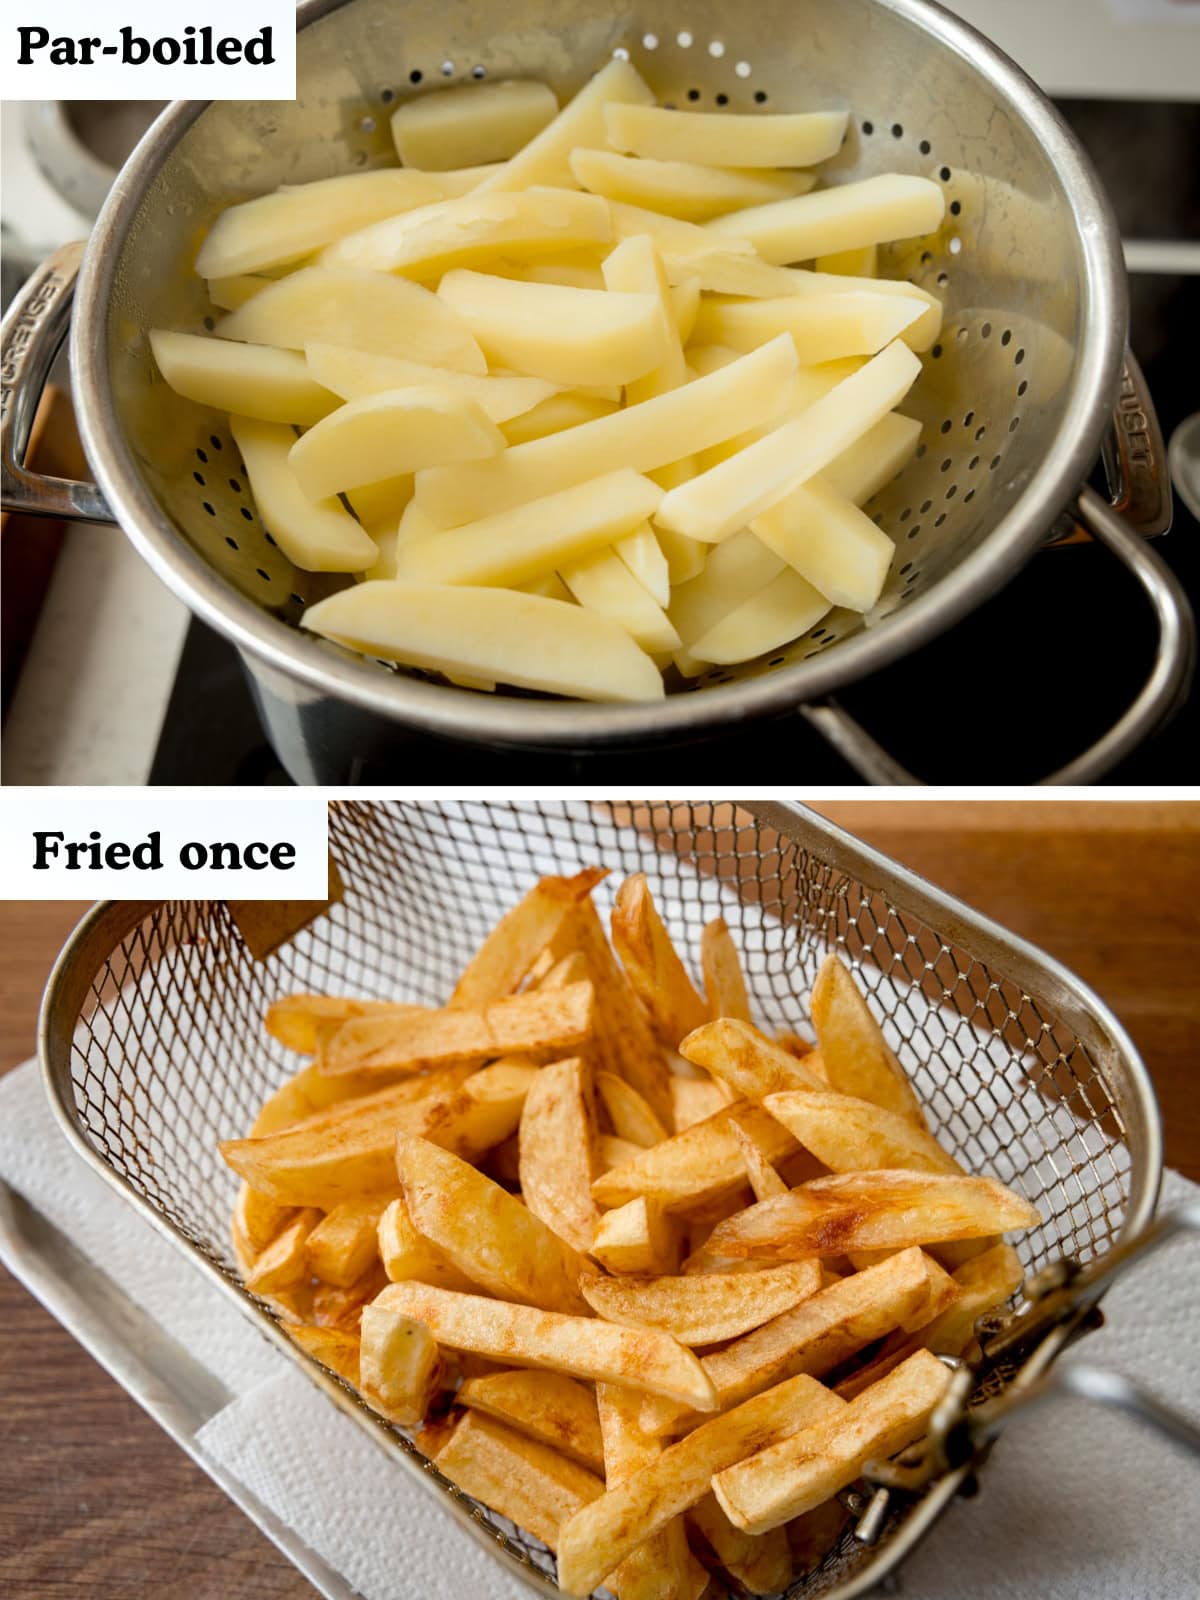 Two wide images stacked one on top of the other. Both images have a white text box in the top left corner with black text in them. The top image says "Par-Boiled" and shows uncooked chips in a silver colander, which is in a silver pan. In the background you can see a white surface, with a wooden cutting board to the left and a black induction hob beneath the silver pan. The bottom image says "Fried Once" and shows the Chip Shop-Style Chips in a silver frying basket, which is placed on top of a silver tray which is lined with white tissue. It is placed on a wooden cutting board.